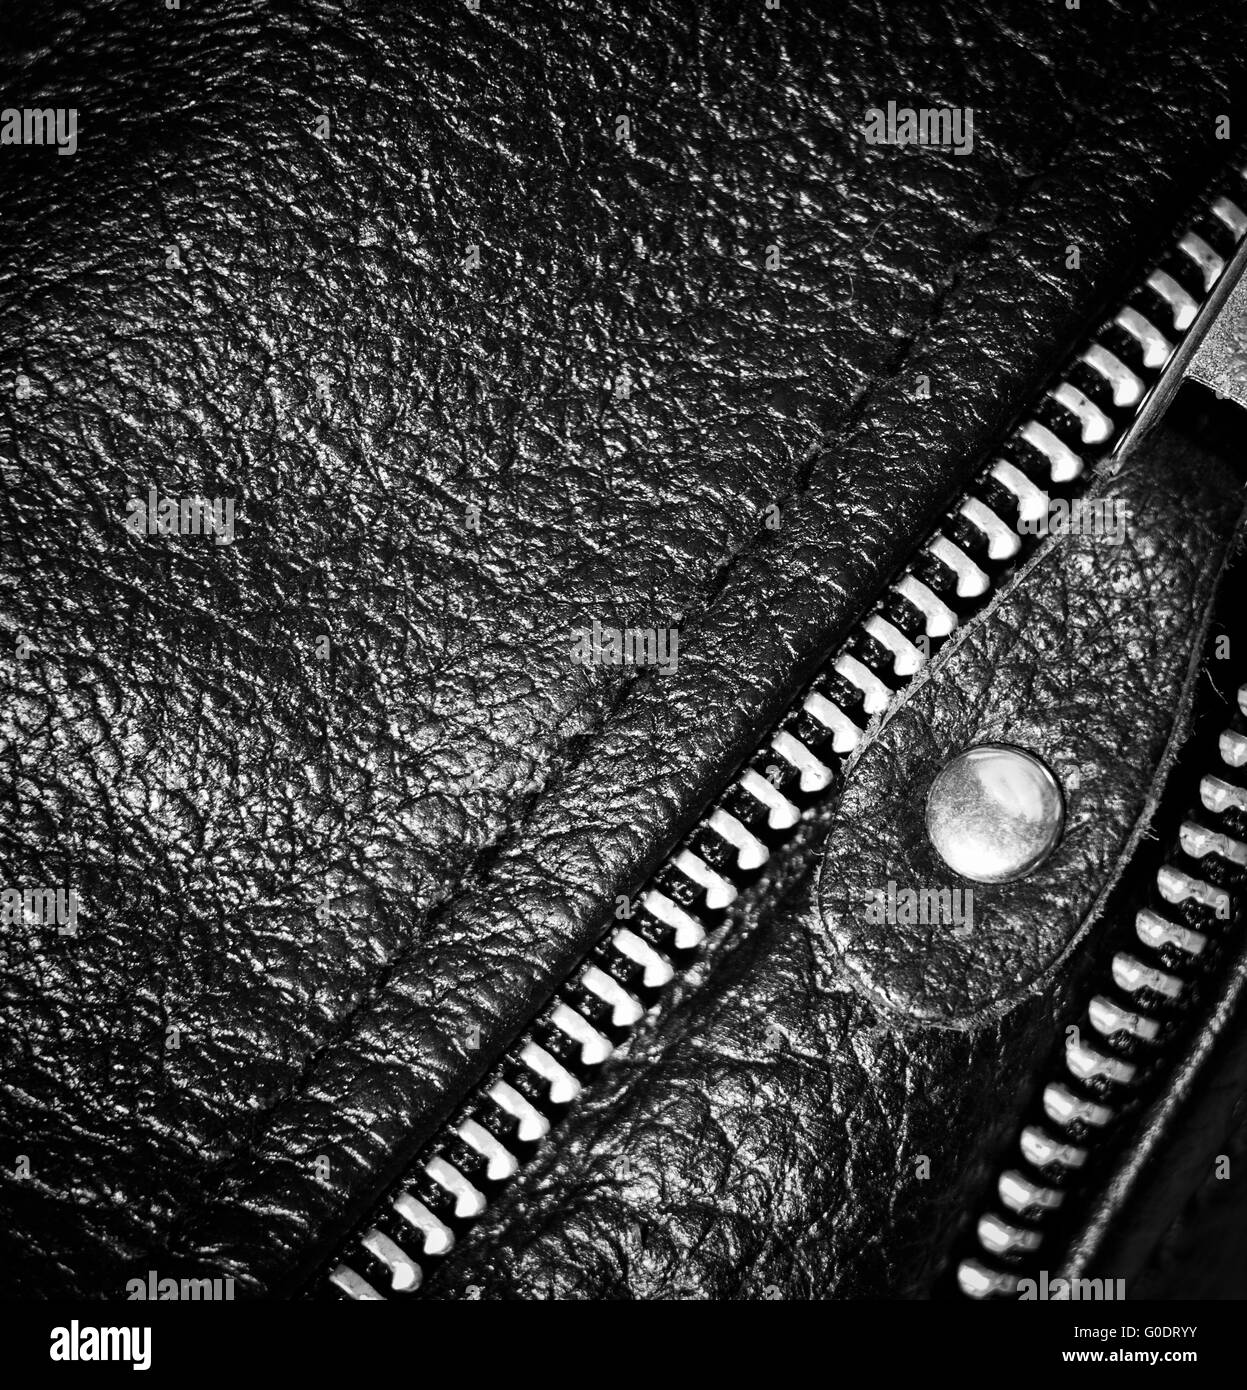 black leather clothing with a zipper. macro photo Stock Photo